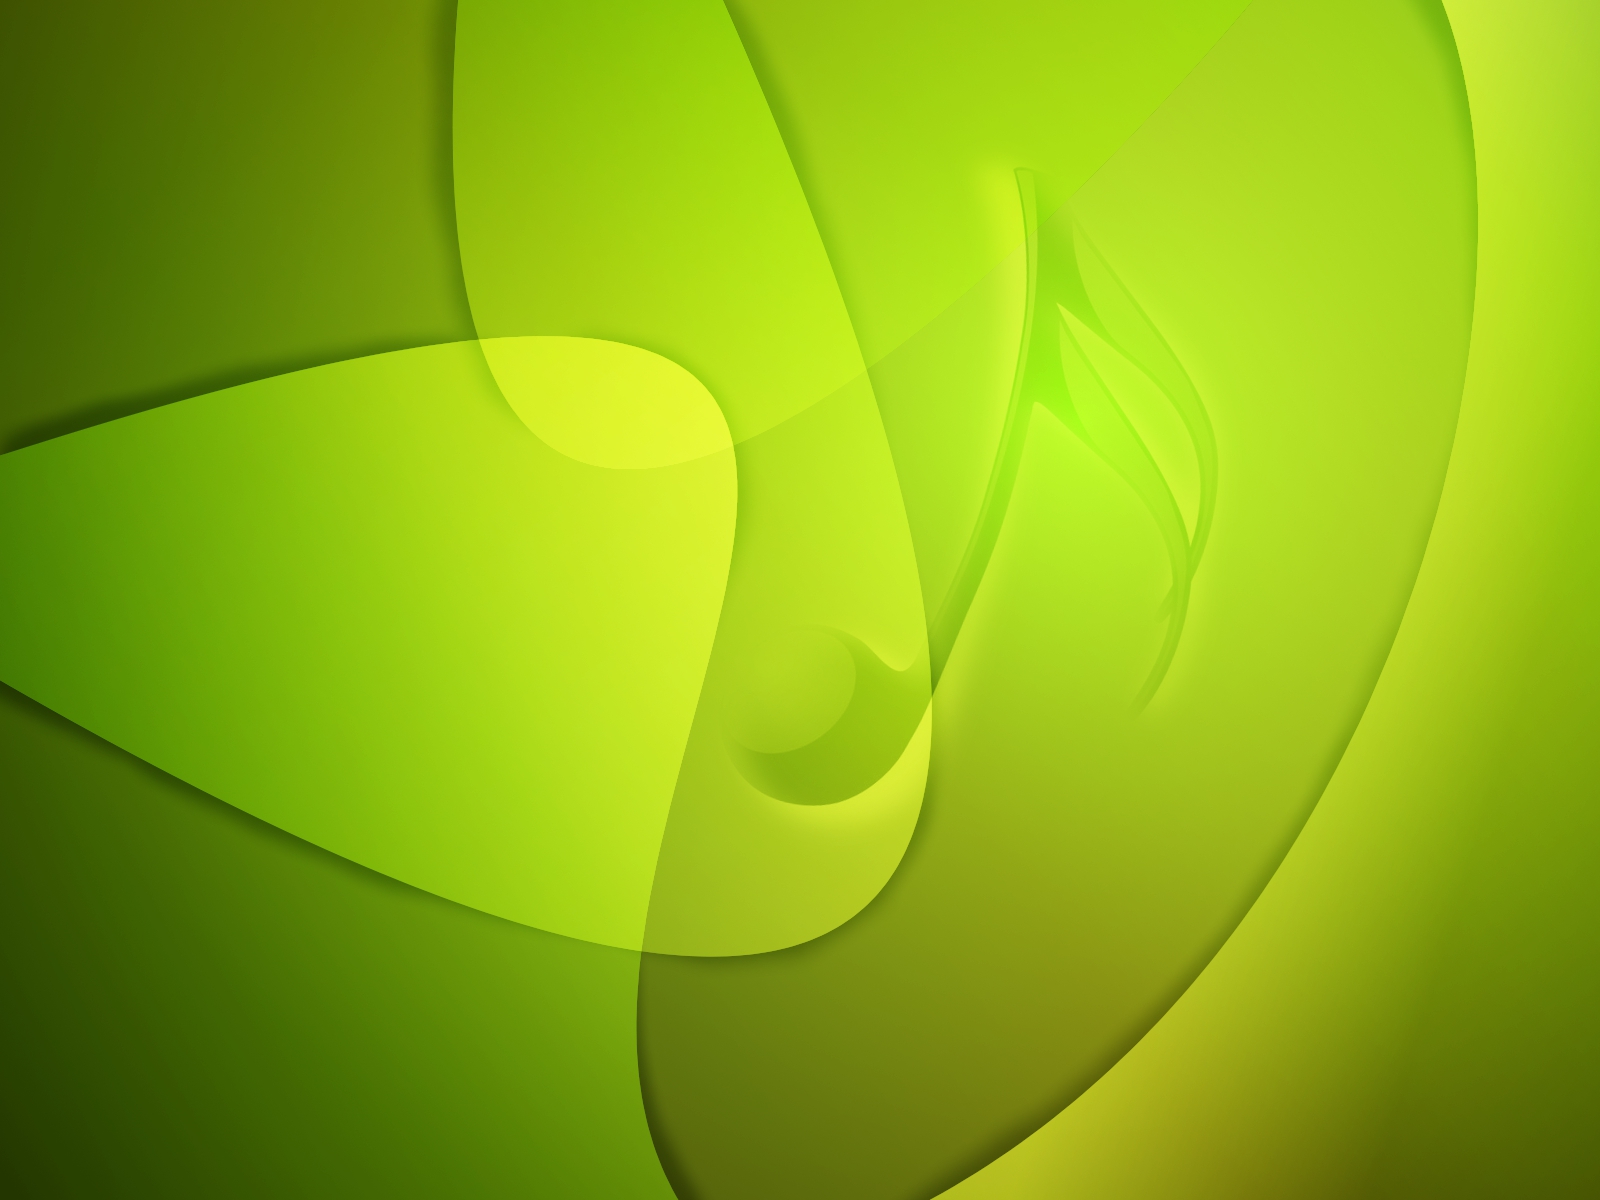 green, yellow, music, artistic, musical note